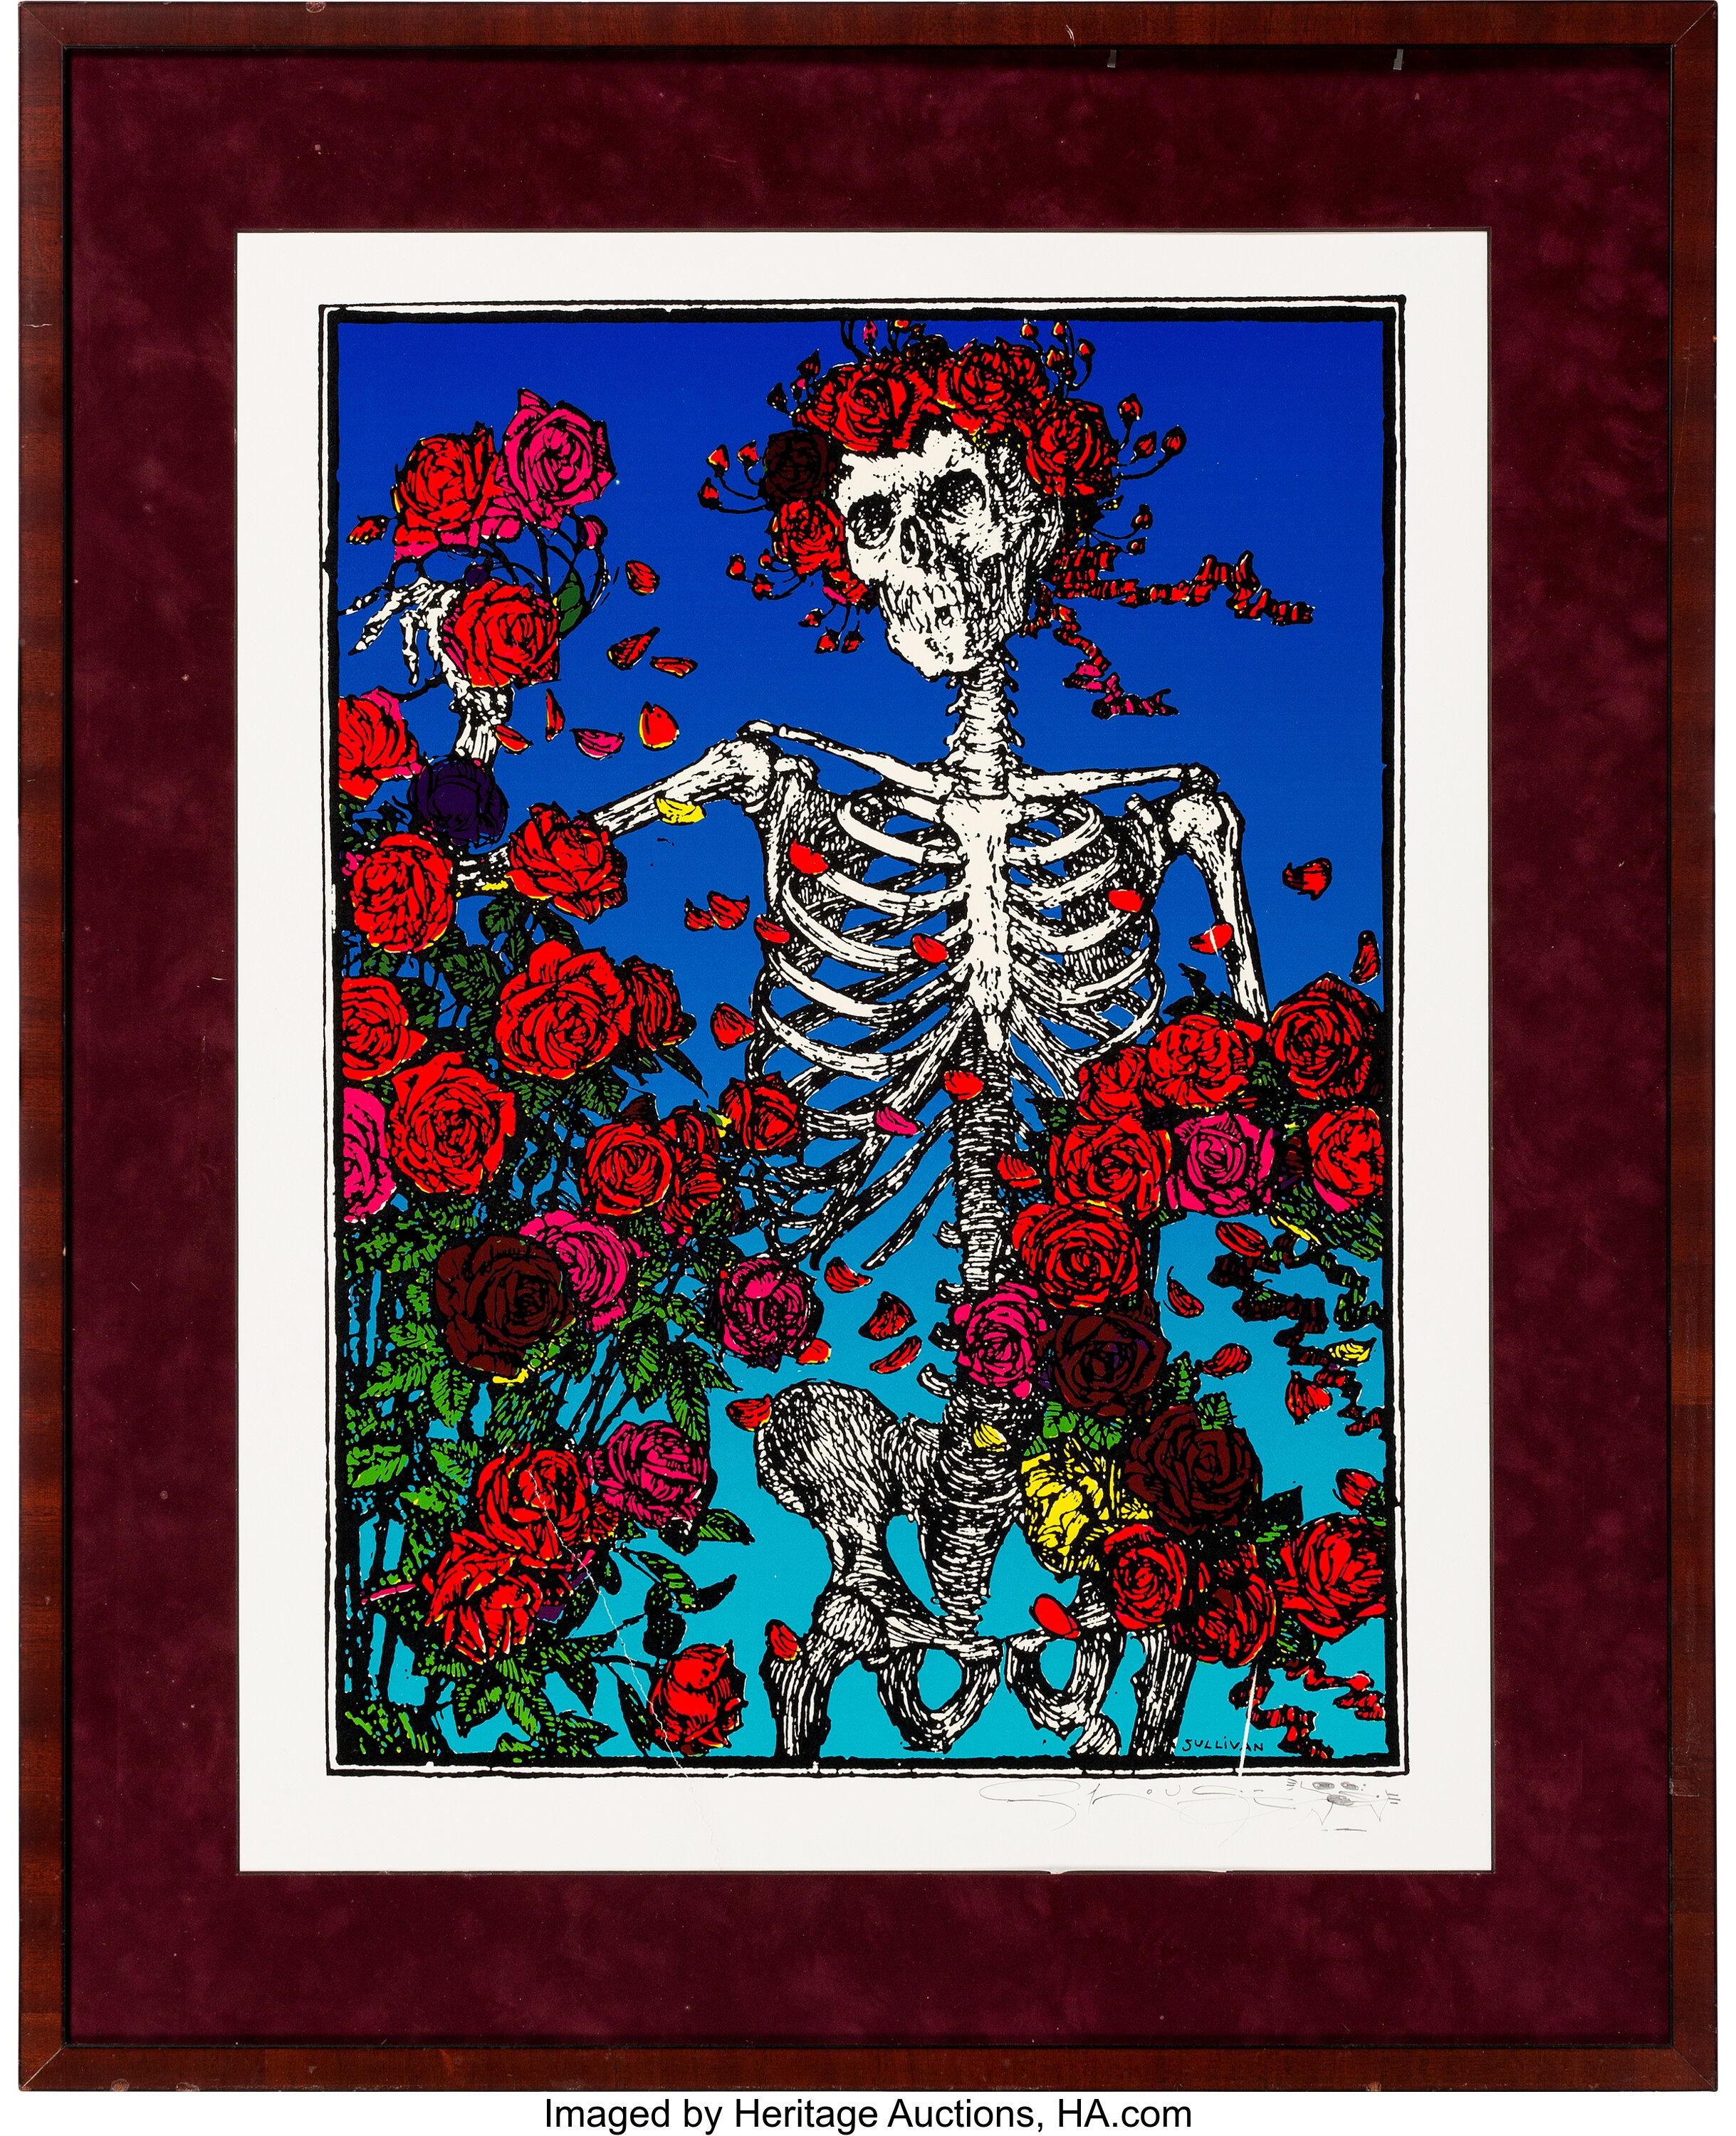 Completed a little project this weekend. Combined two of my favorites,  Grateful Dead and vintage LV. Inspired by the iconic Skull & Roses  illustration. I hand painted it on a mid 80's